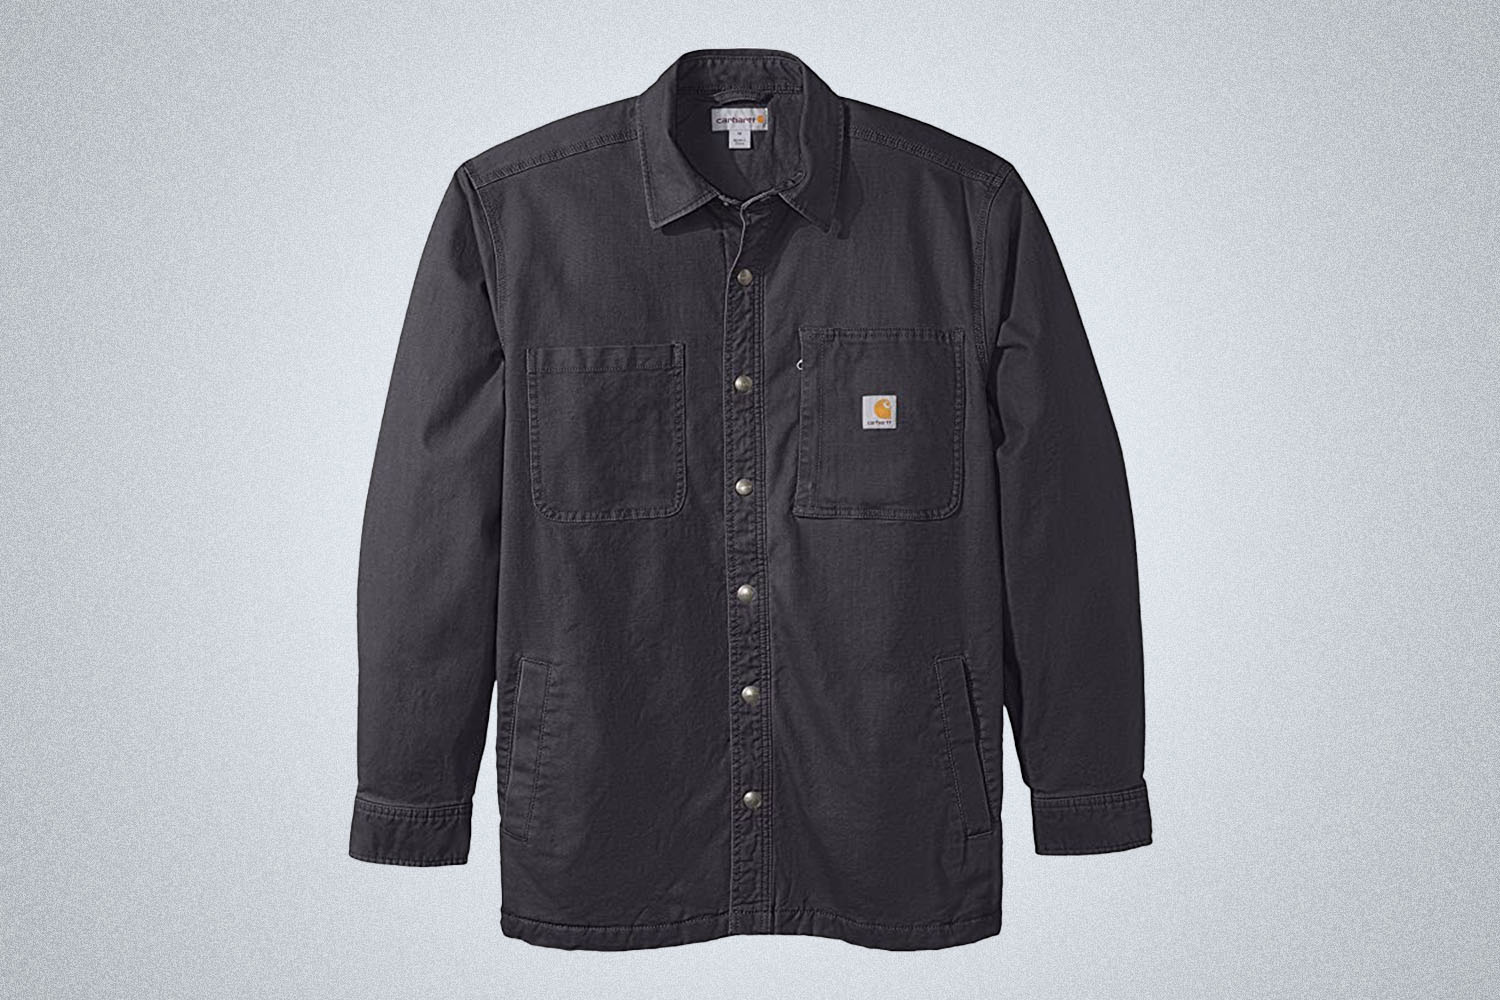 A grey overshirt from Carhartt on a grey background